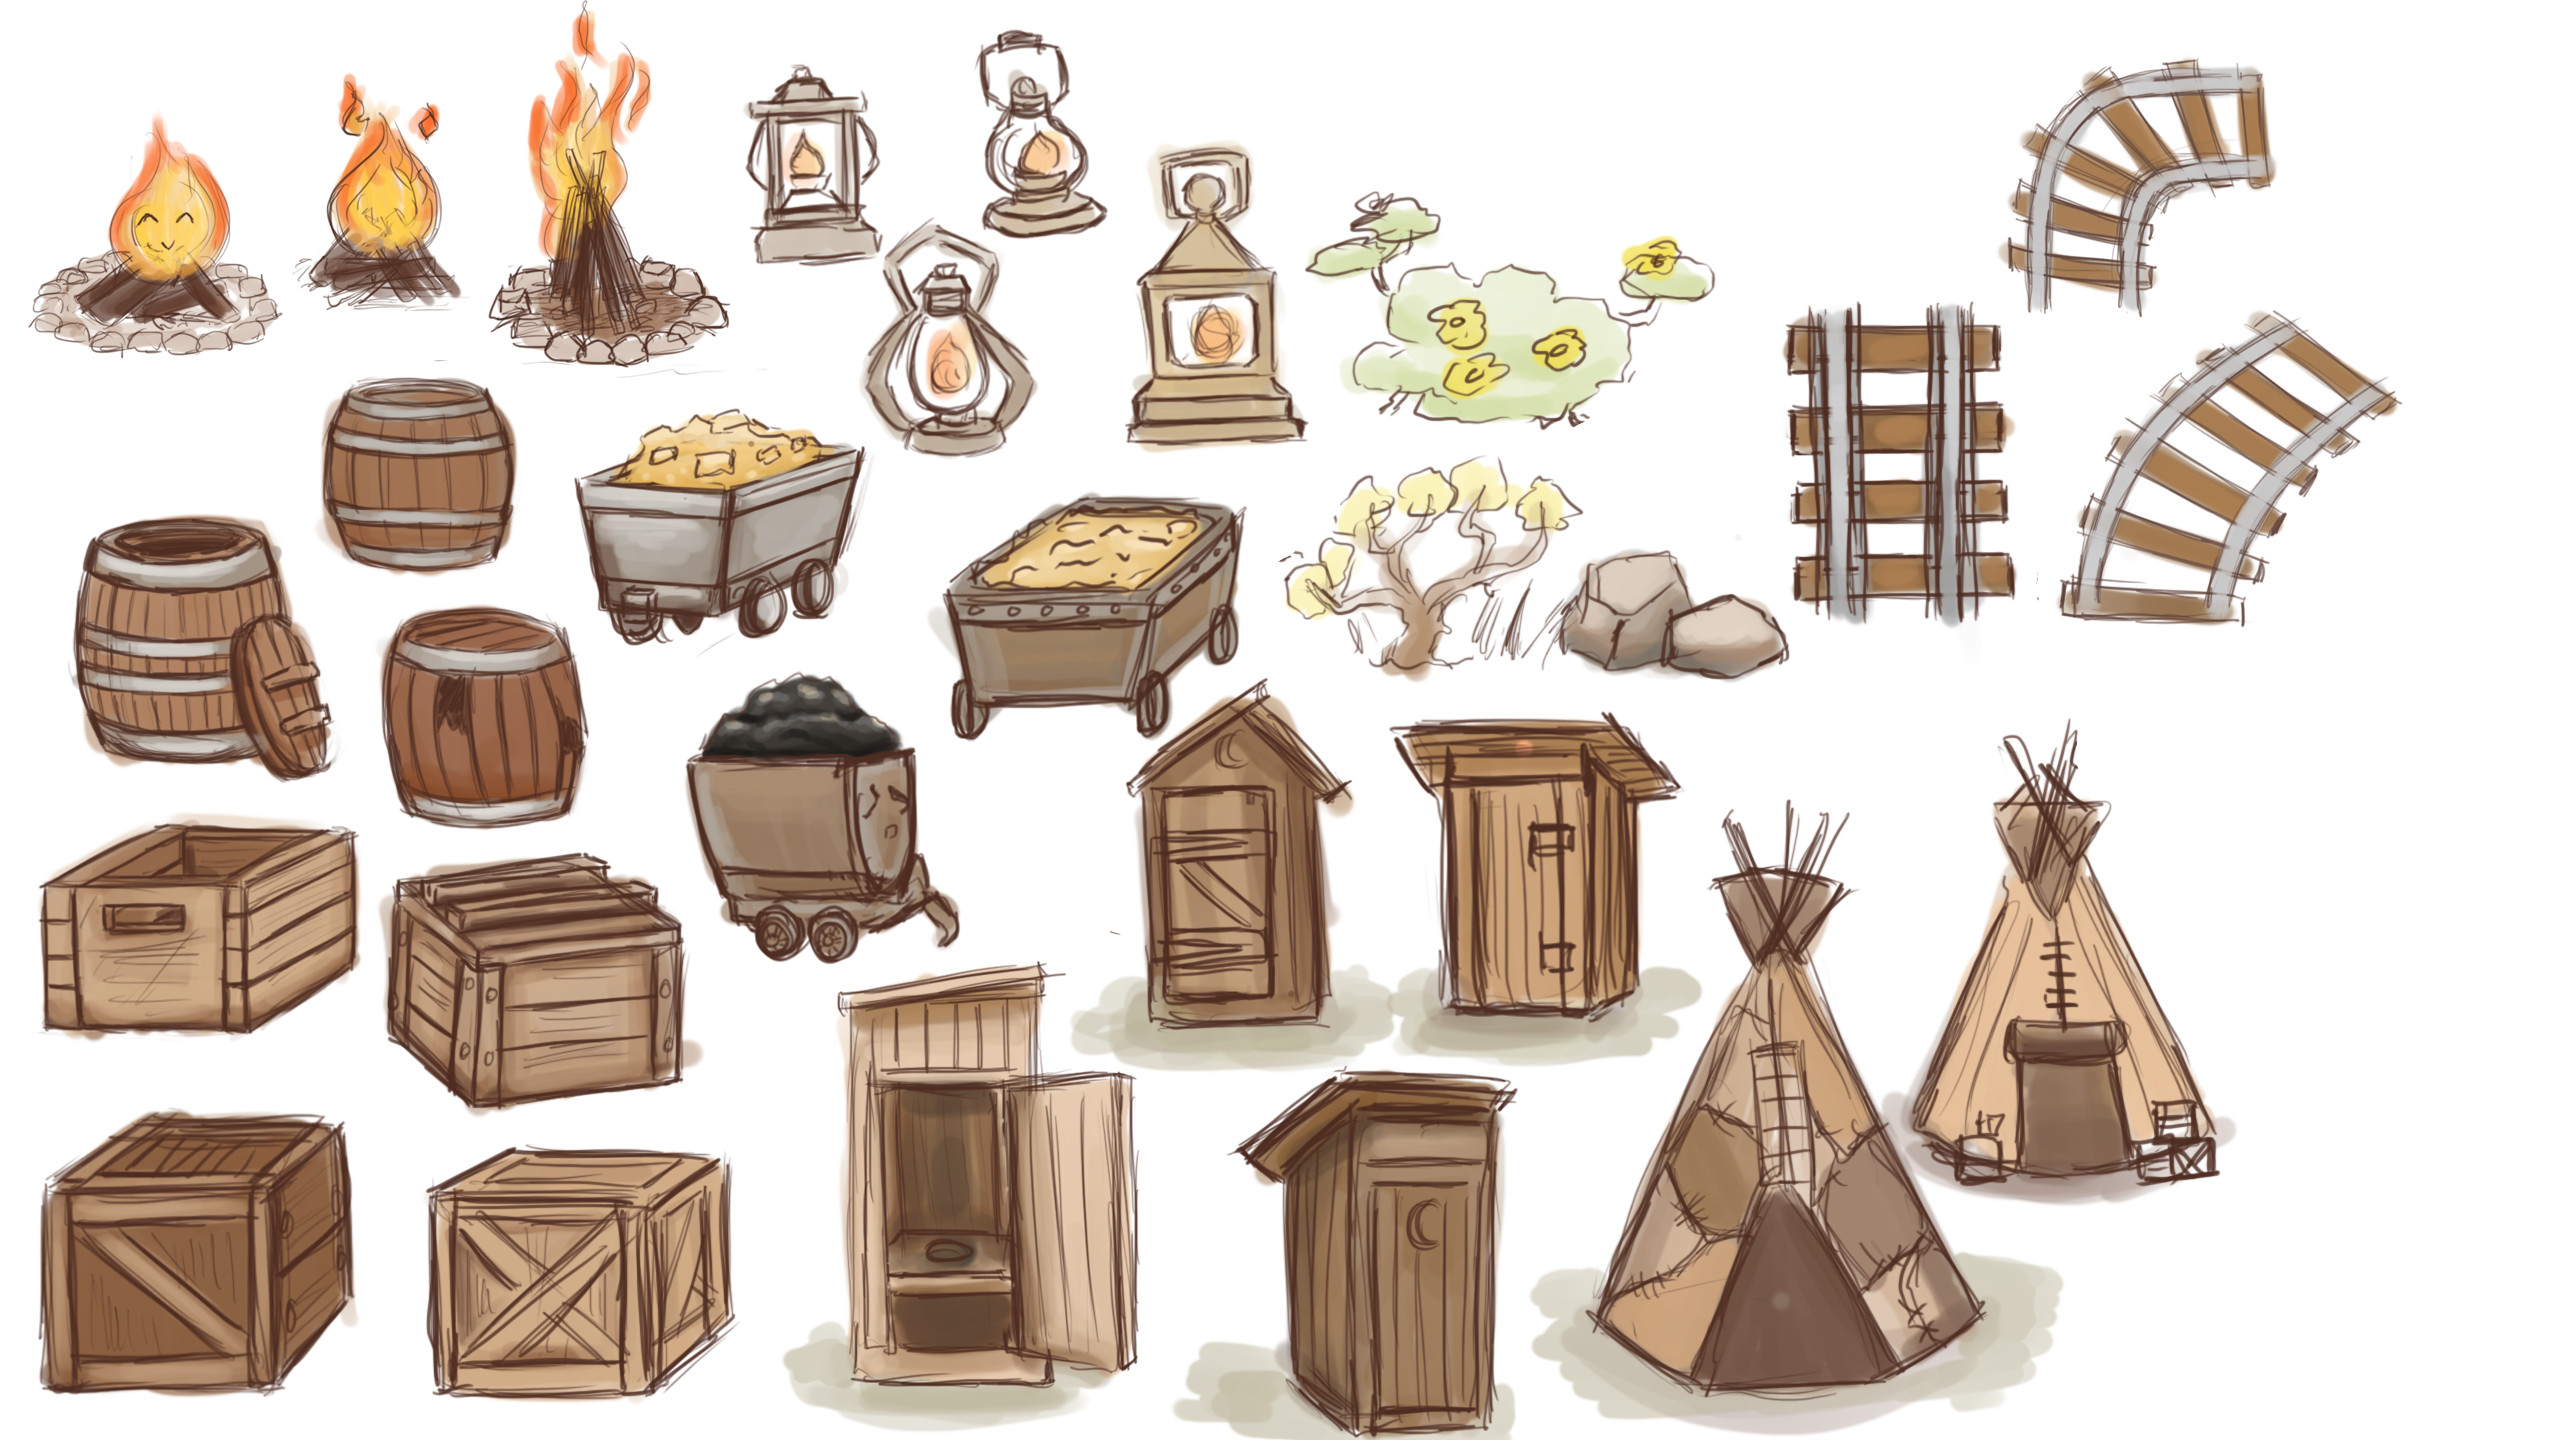 Initial sketches, just planning out how I may approach some designs for the assets